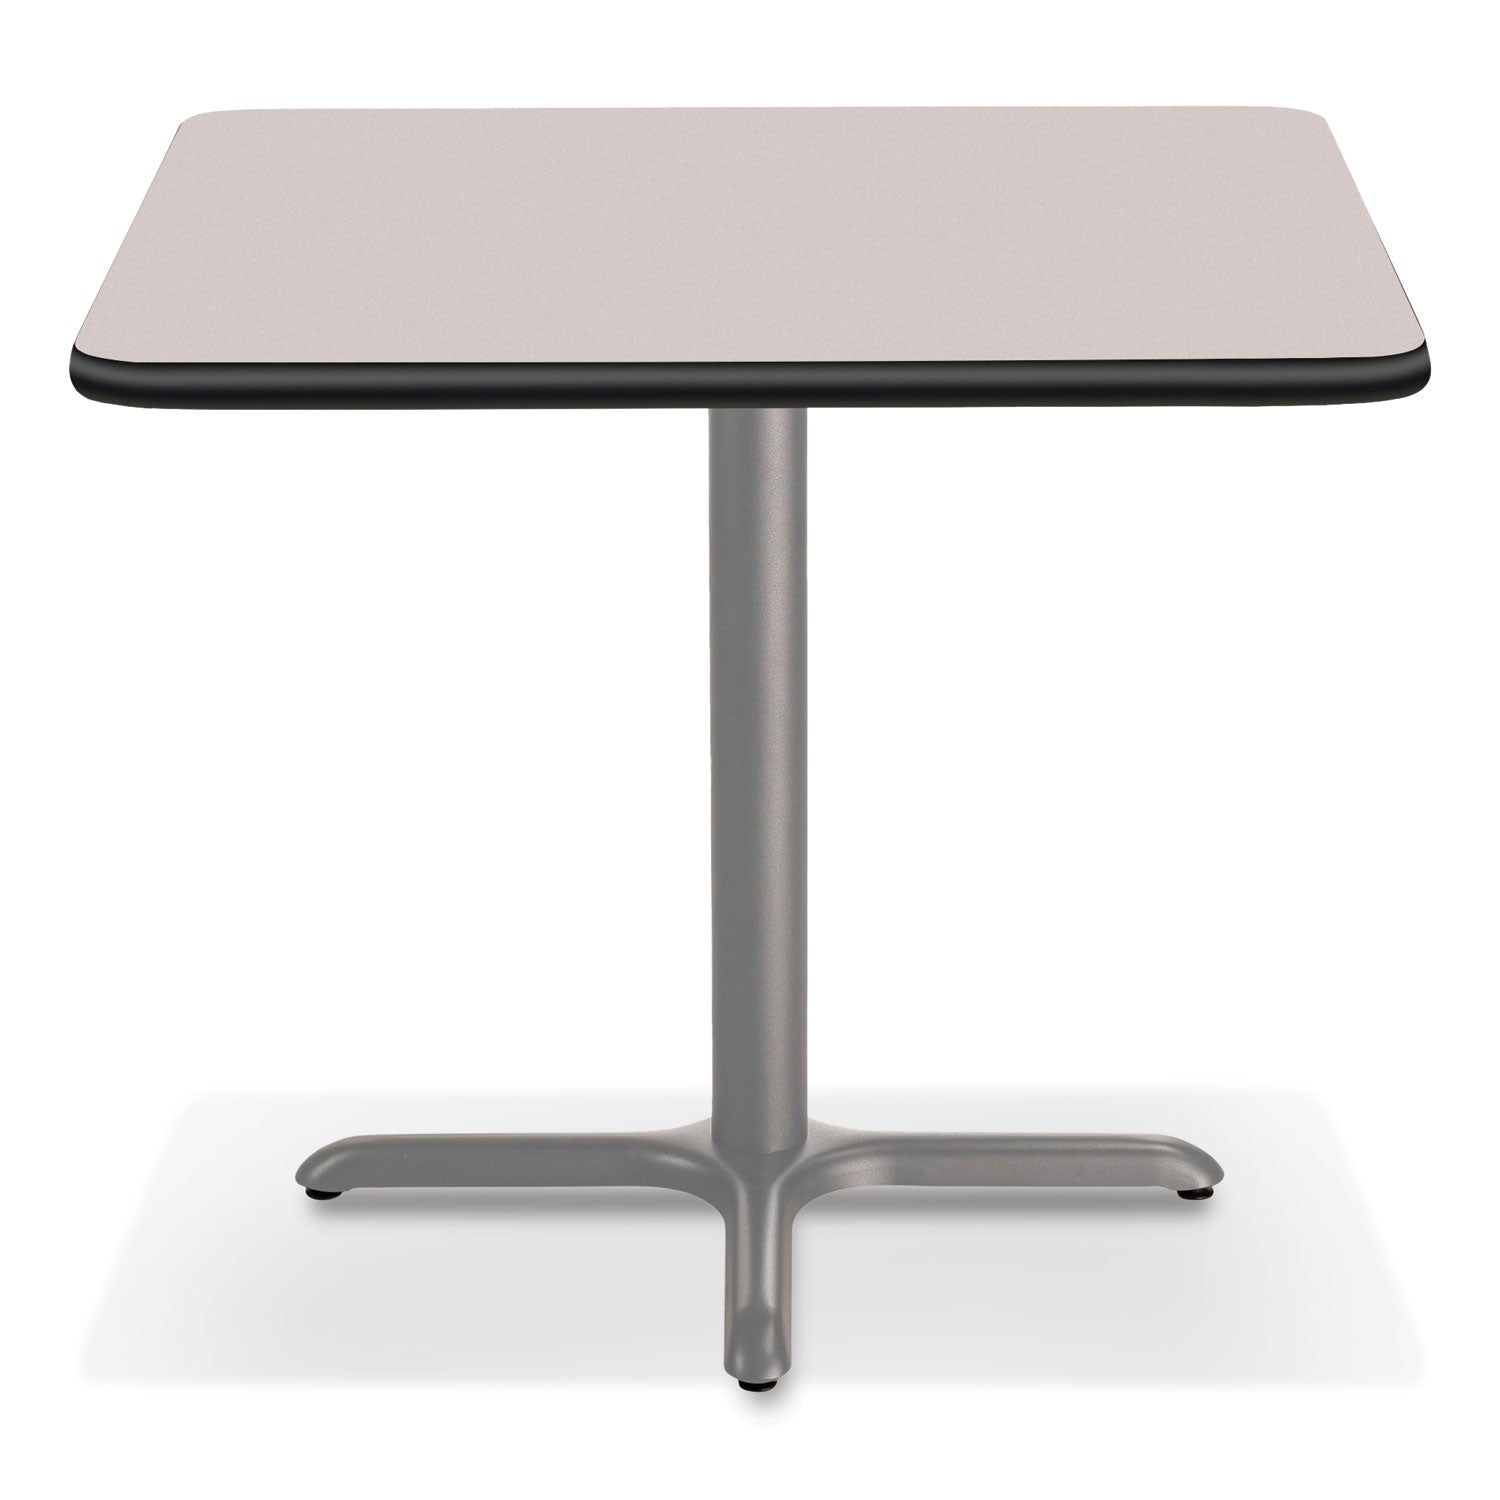 cafe-table-36w-x-36d-x-30h-square-top-x-base-gray-nebula-top-gray-base-ships-in-7-10-business-days_npscg33636xd1gy - 2